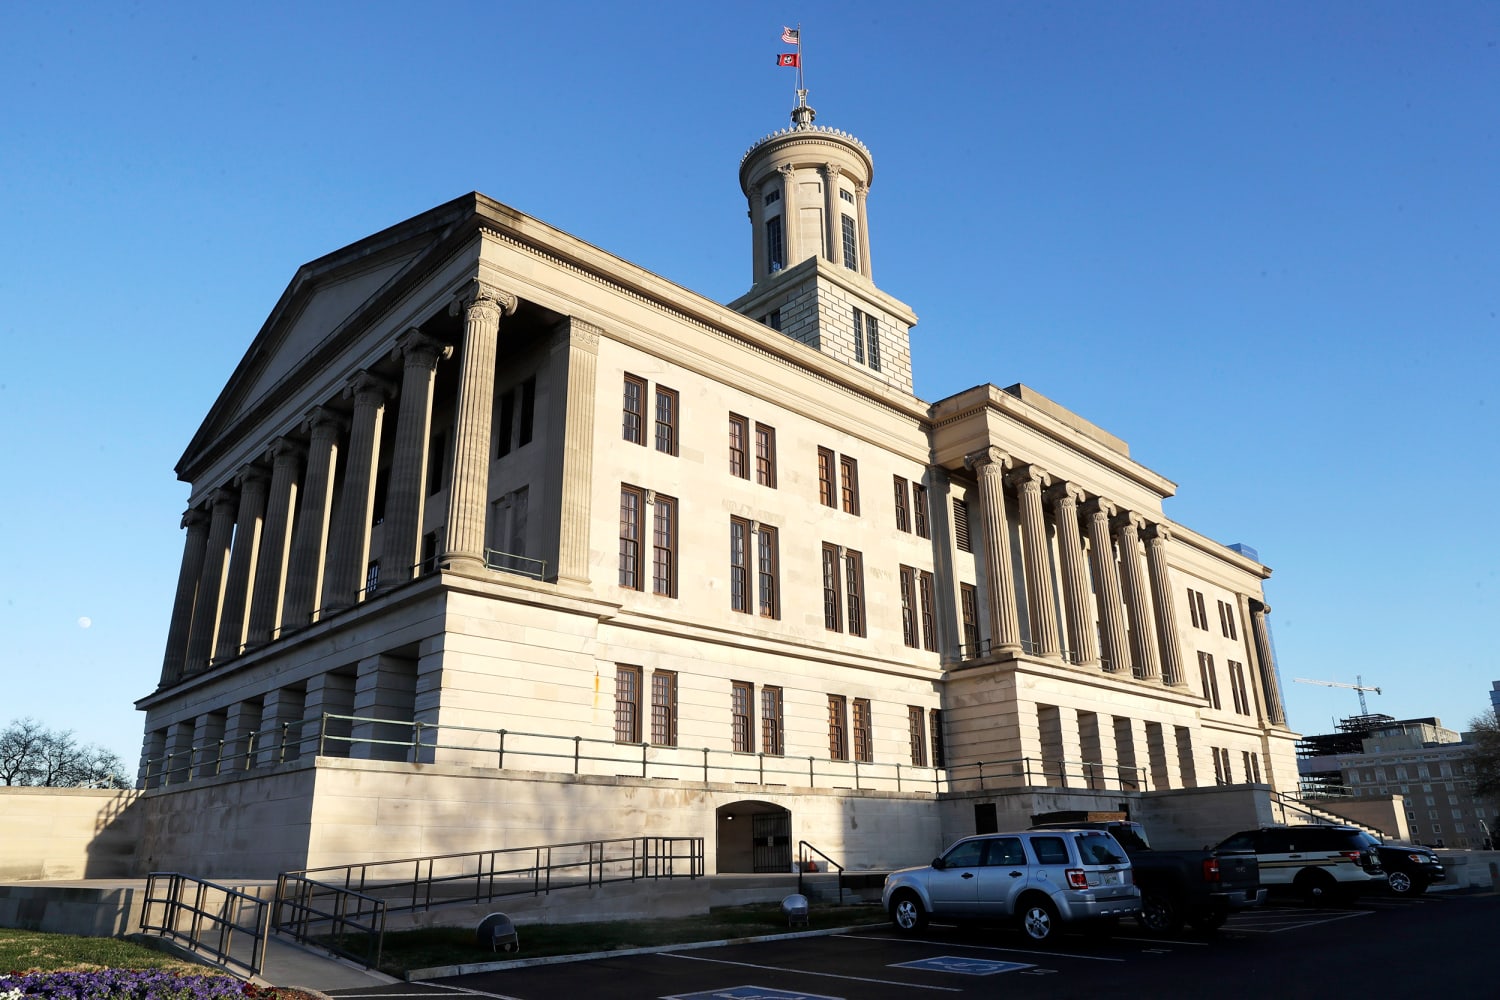 The Department of Justice says Tennessee’s penalties for people with HIV are discriminatory